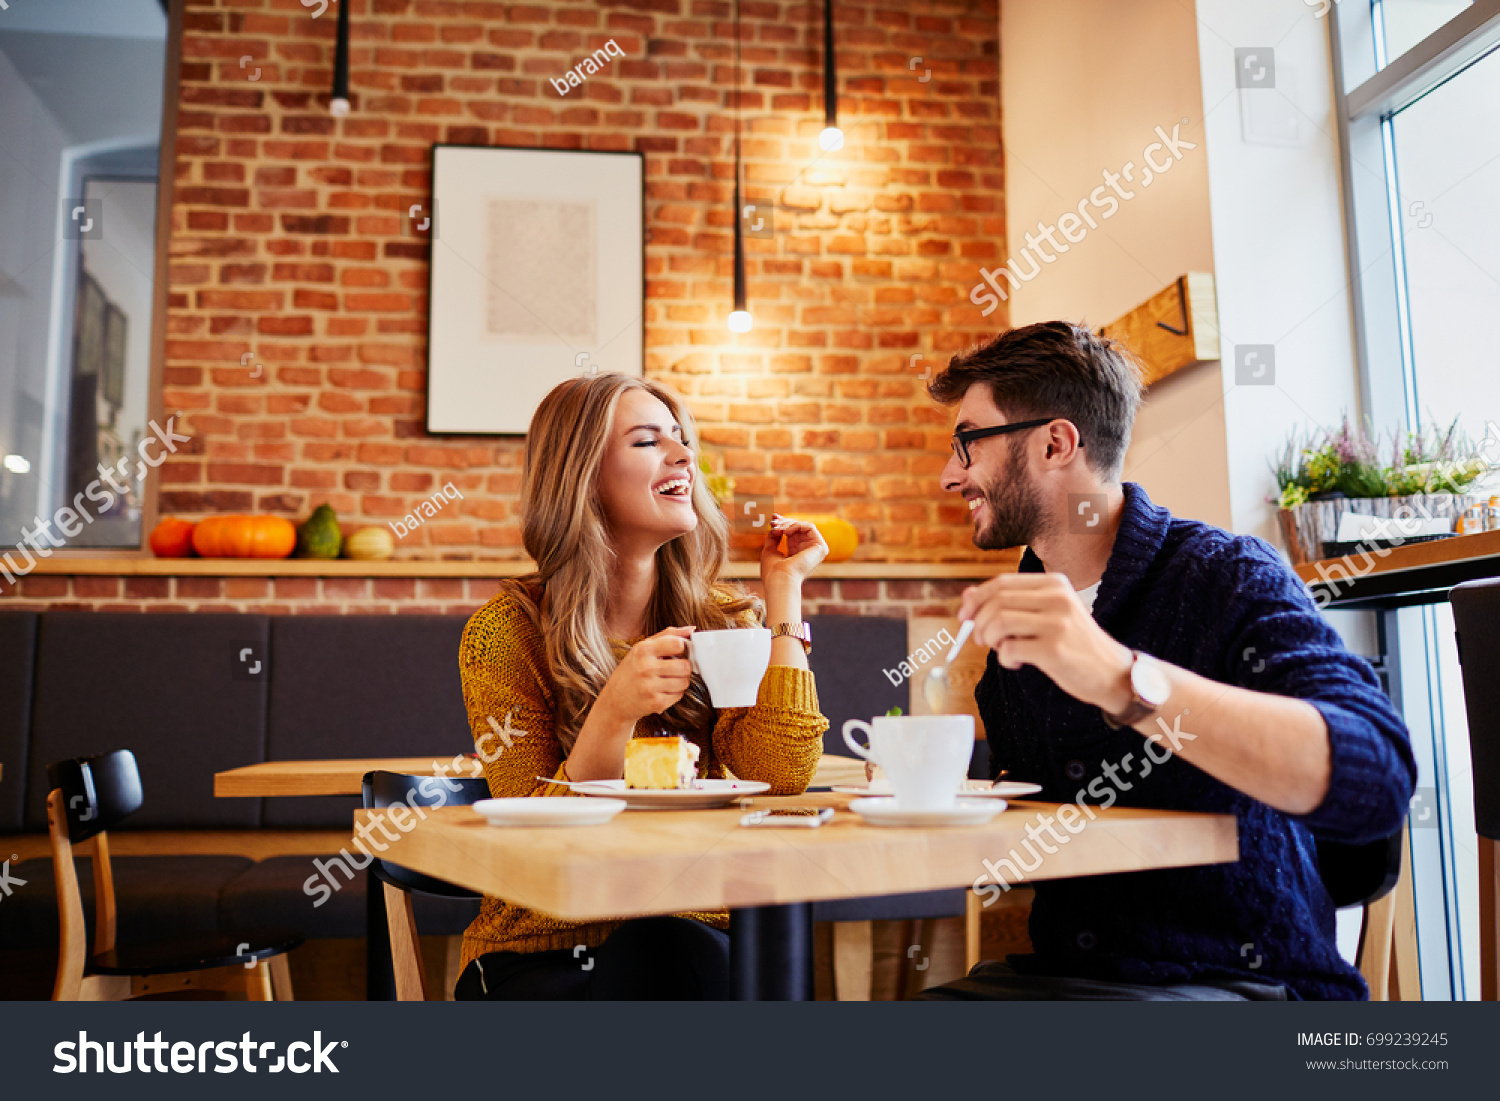 Couple of young people drinking coffee and eating cake in a stylish modern cafeteria #699239245